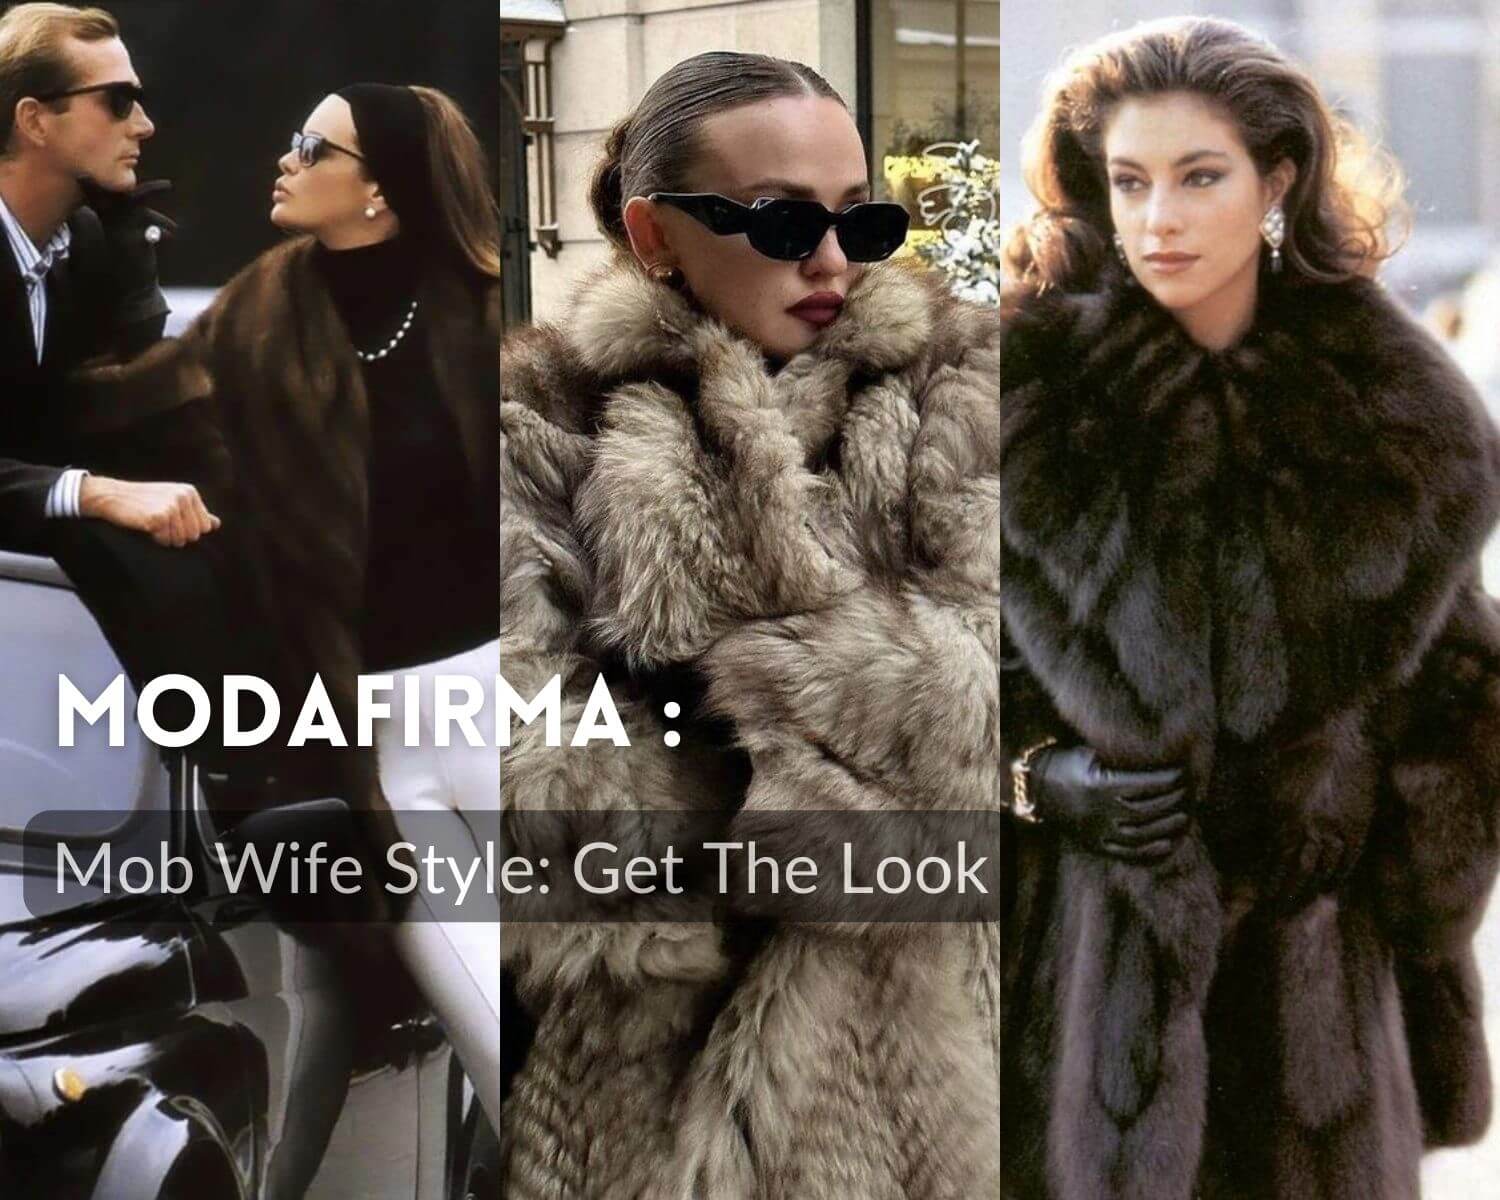 Mob Wife Style: Get The Look